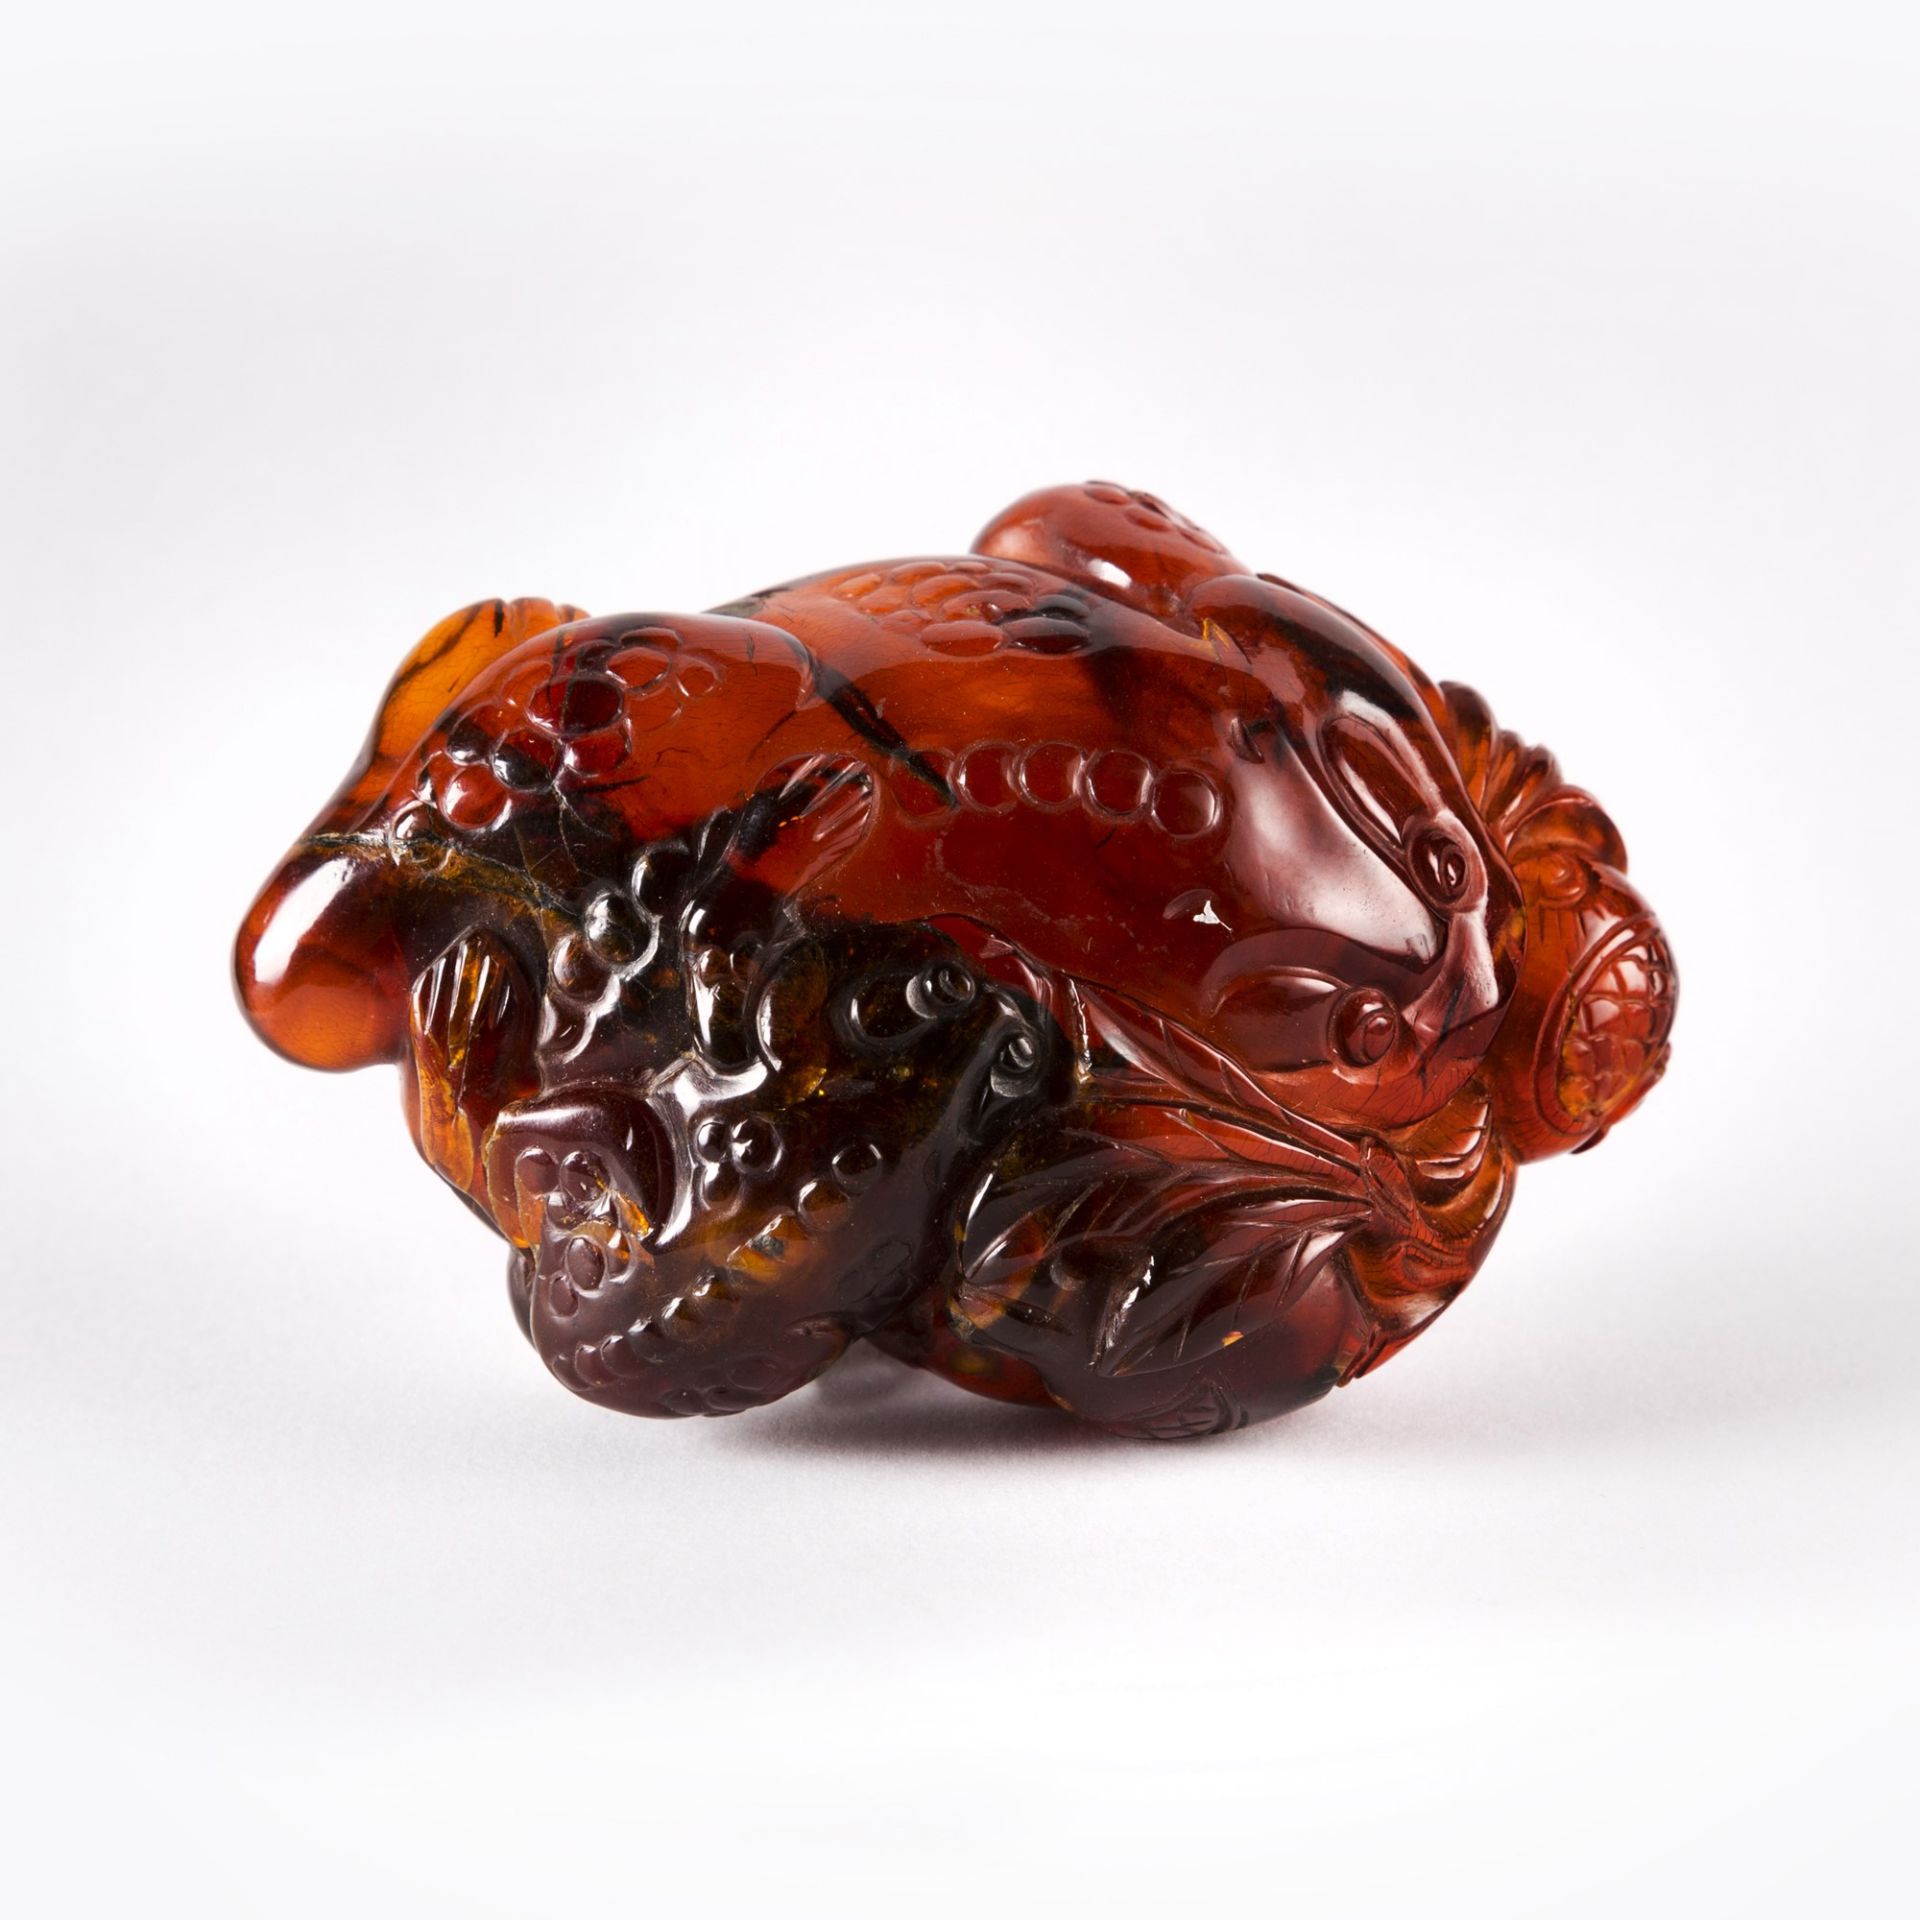 AN AMBER CARVING OF A TOAD  l. 7 cm